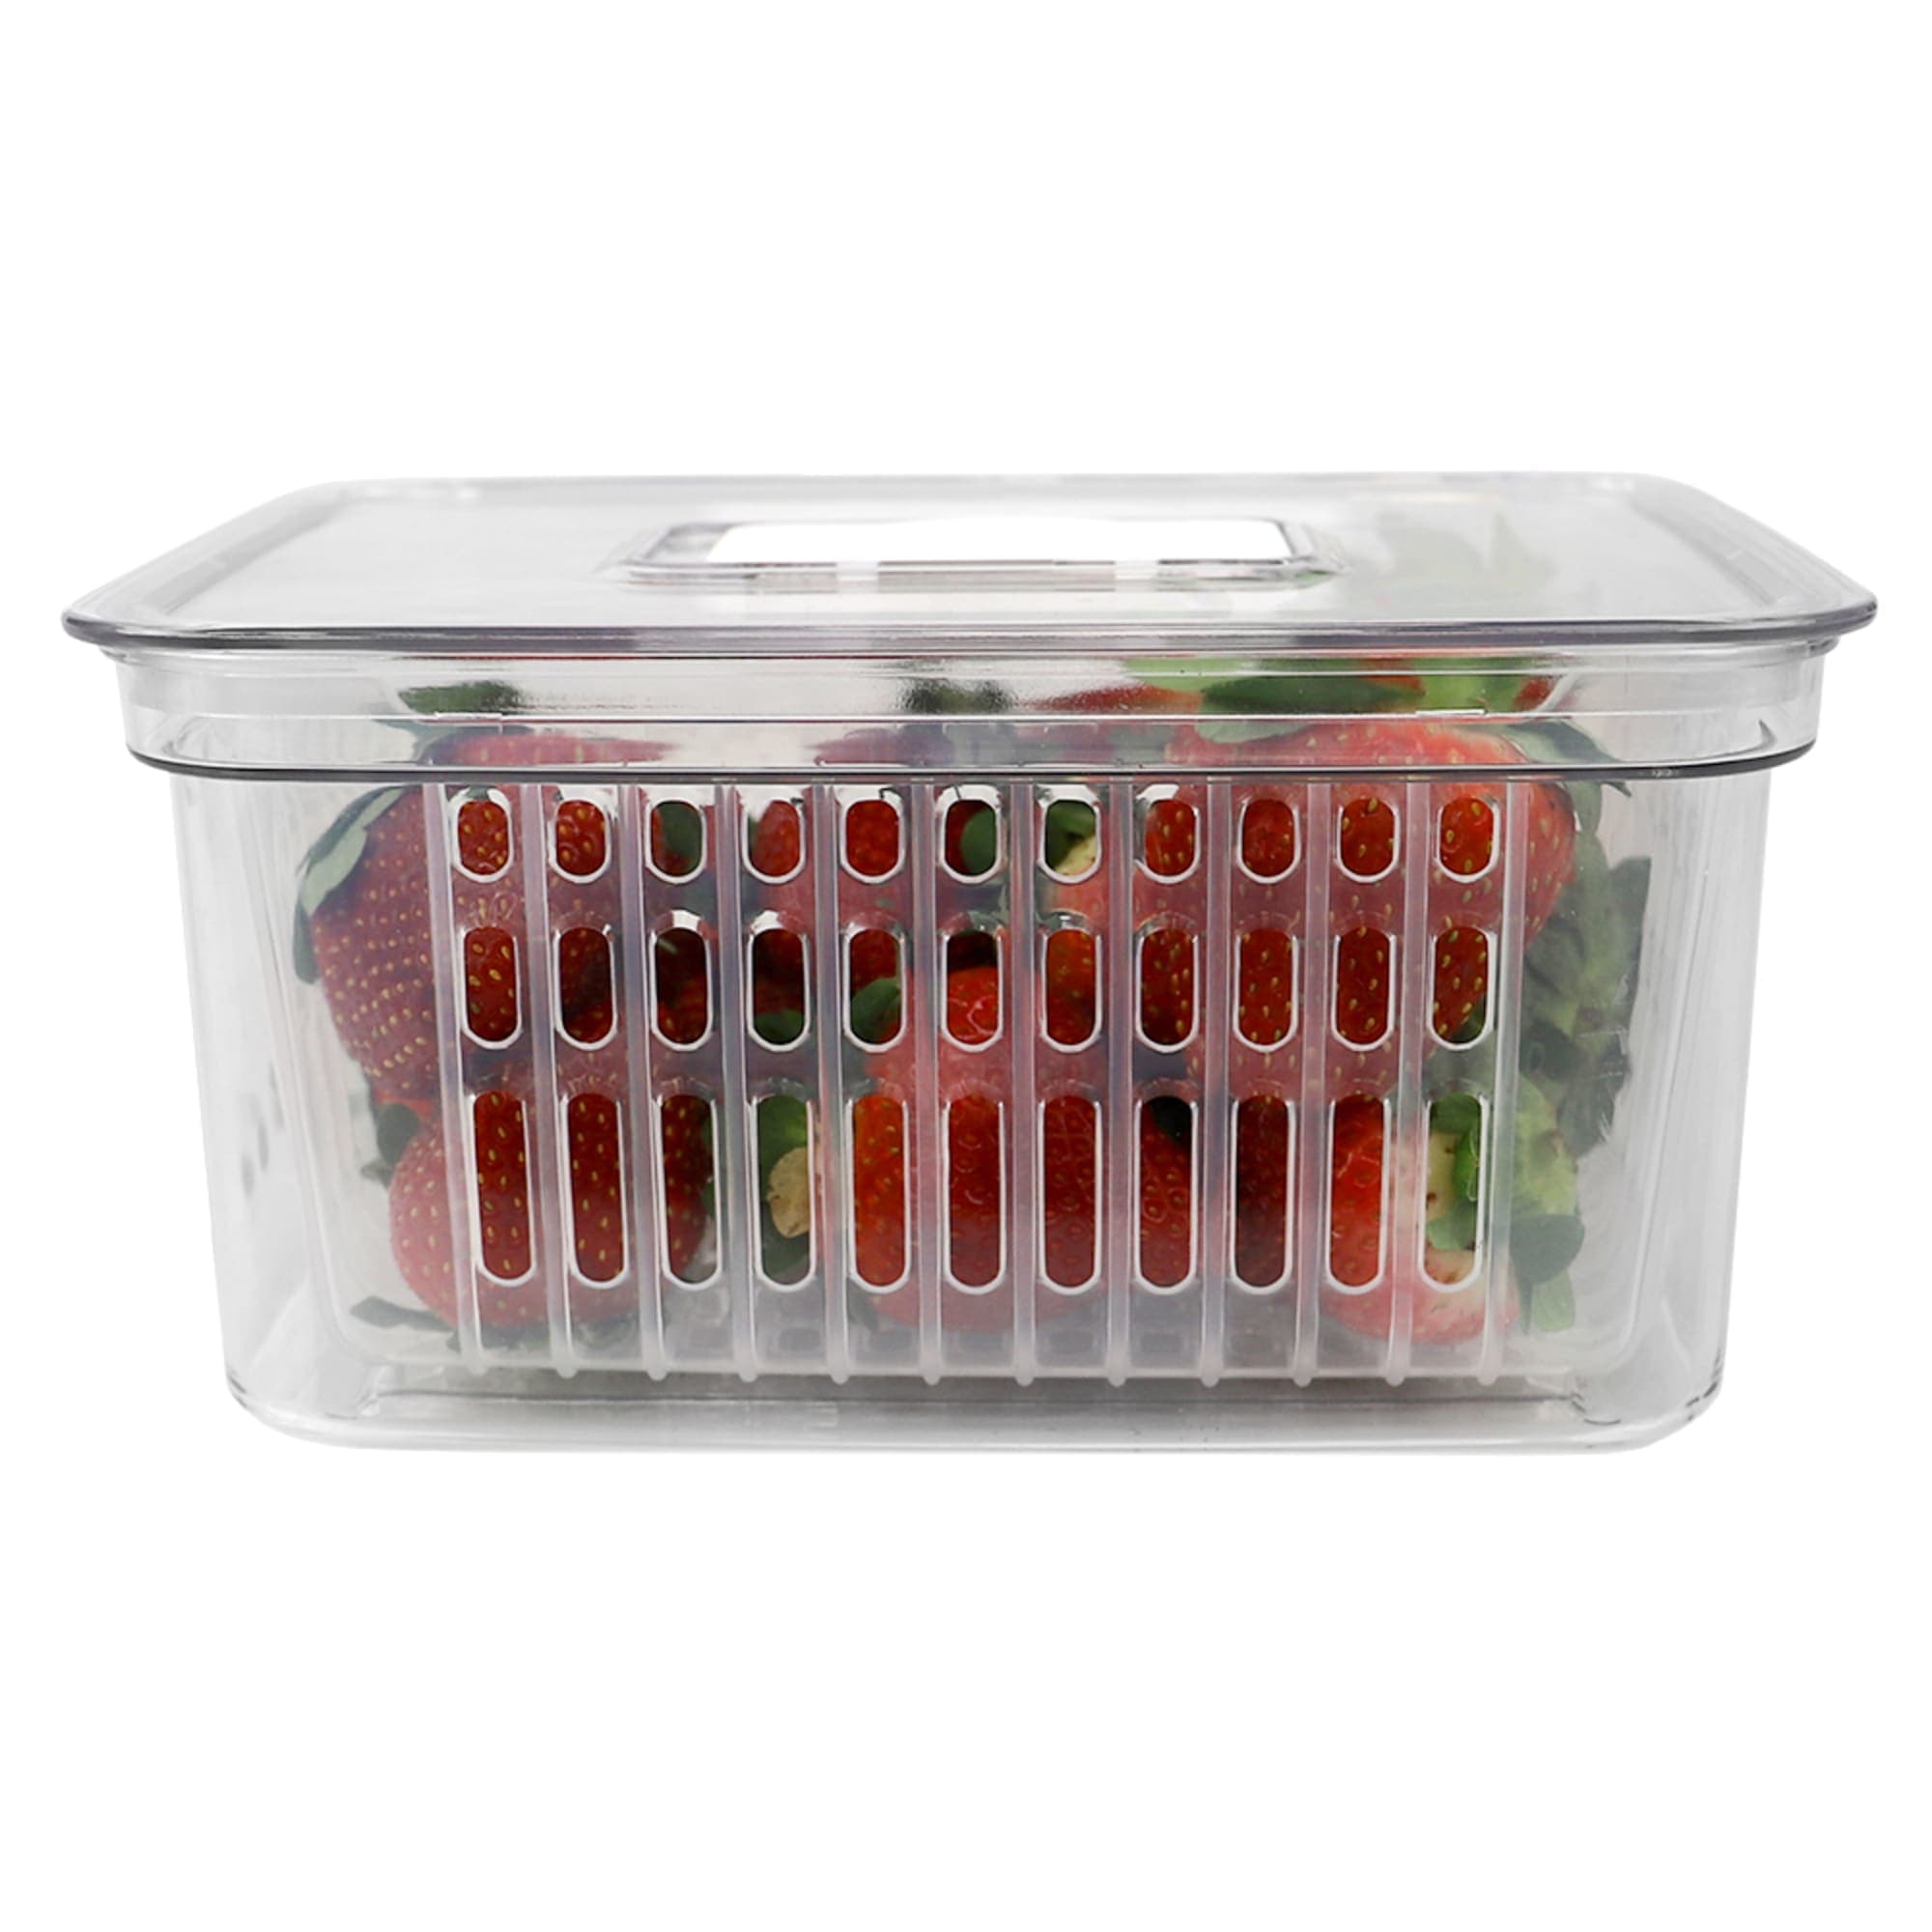 Home Basics Keep Fresh Small Vegetable Keeper, Clear $4.00 EACH, CASE PACK OF 12